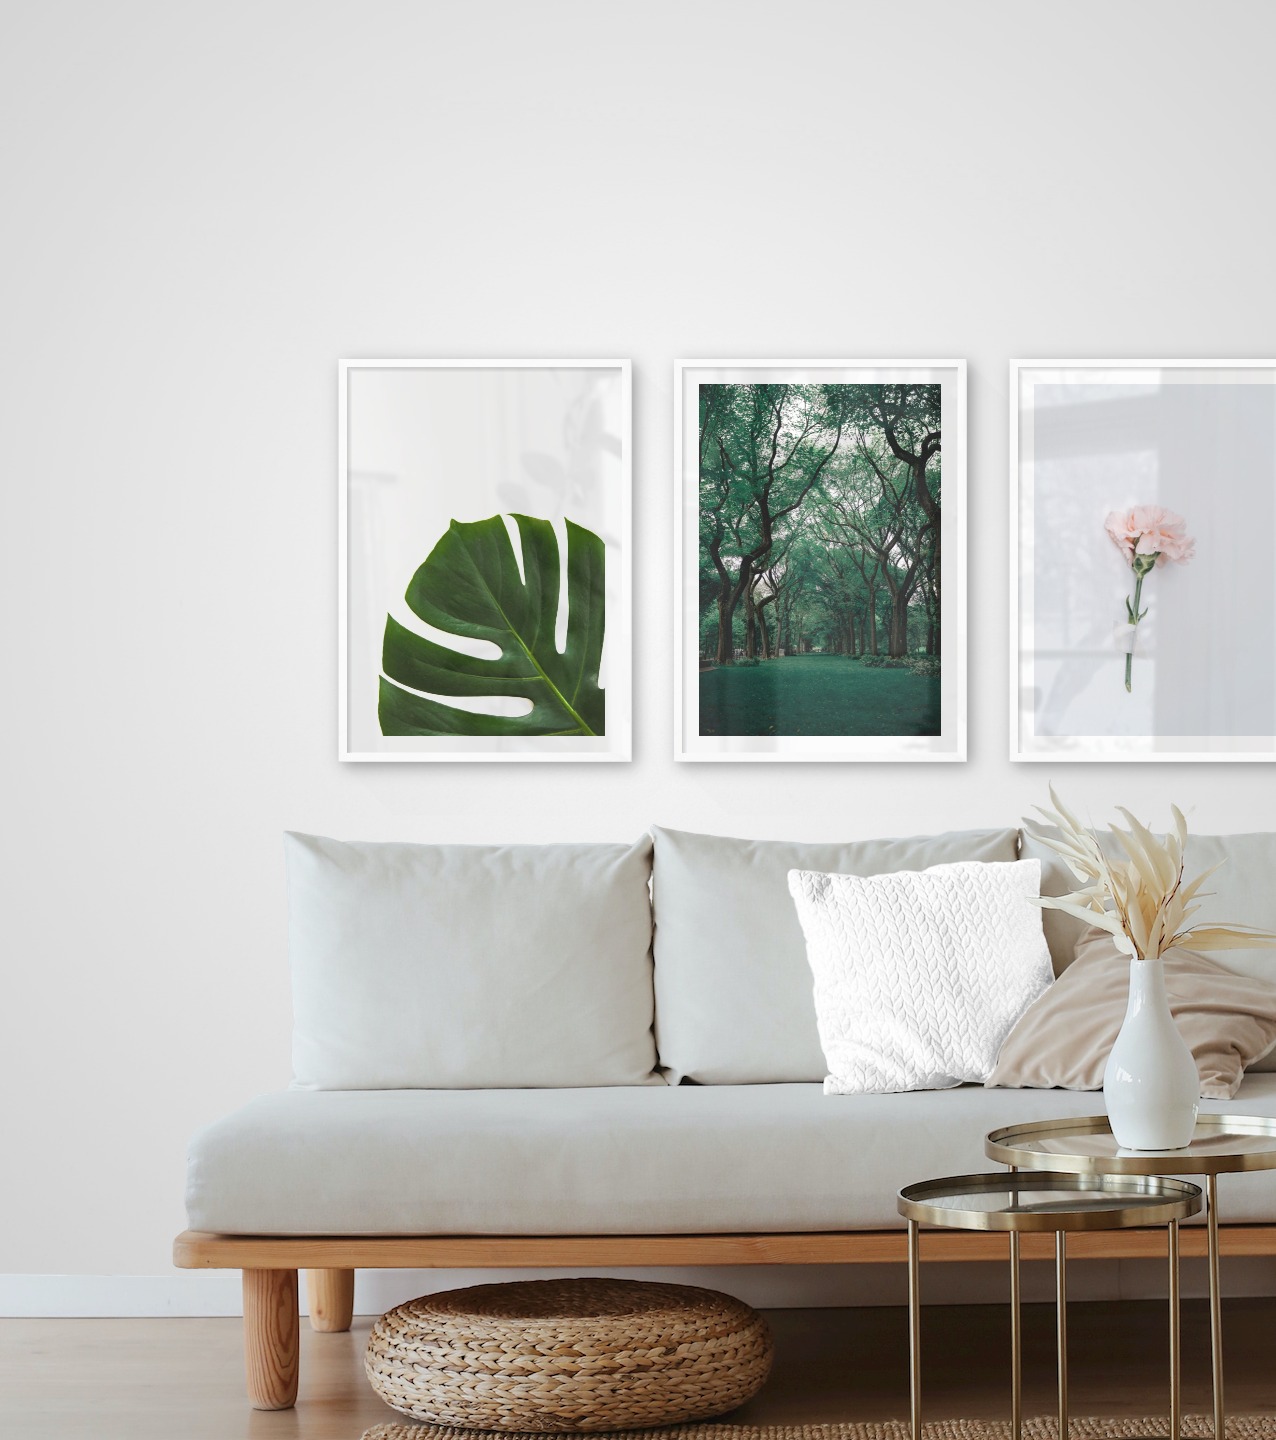 Gallery wall with picture frames in white in sizes 50x70 with prints "Plant", "Greenery and trees" and "Pink flower"